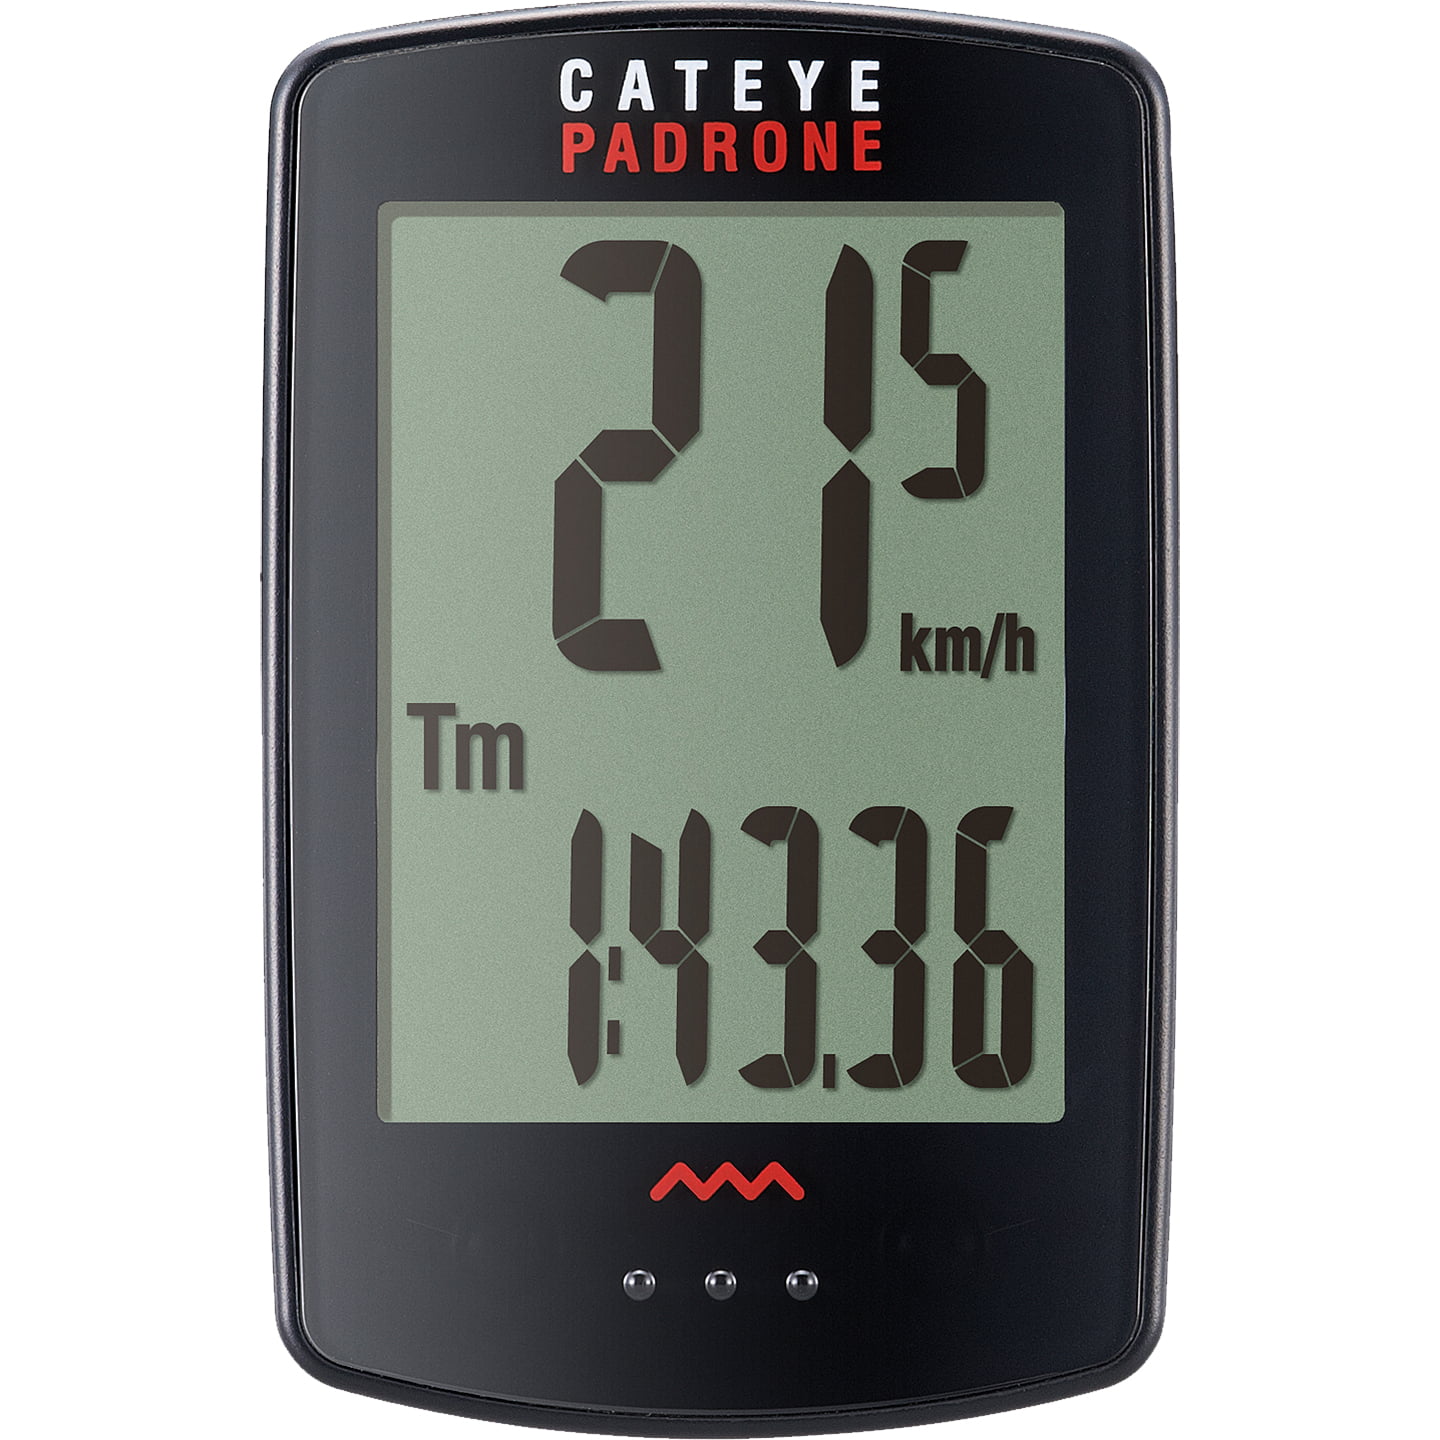 CATEYE Padrone Cycling Computer Cycling Computer, Bike accessories